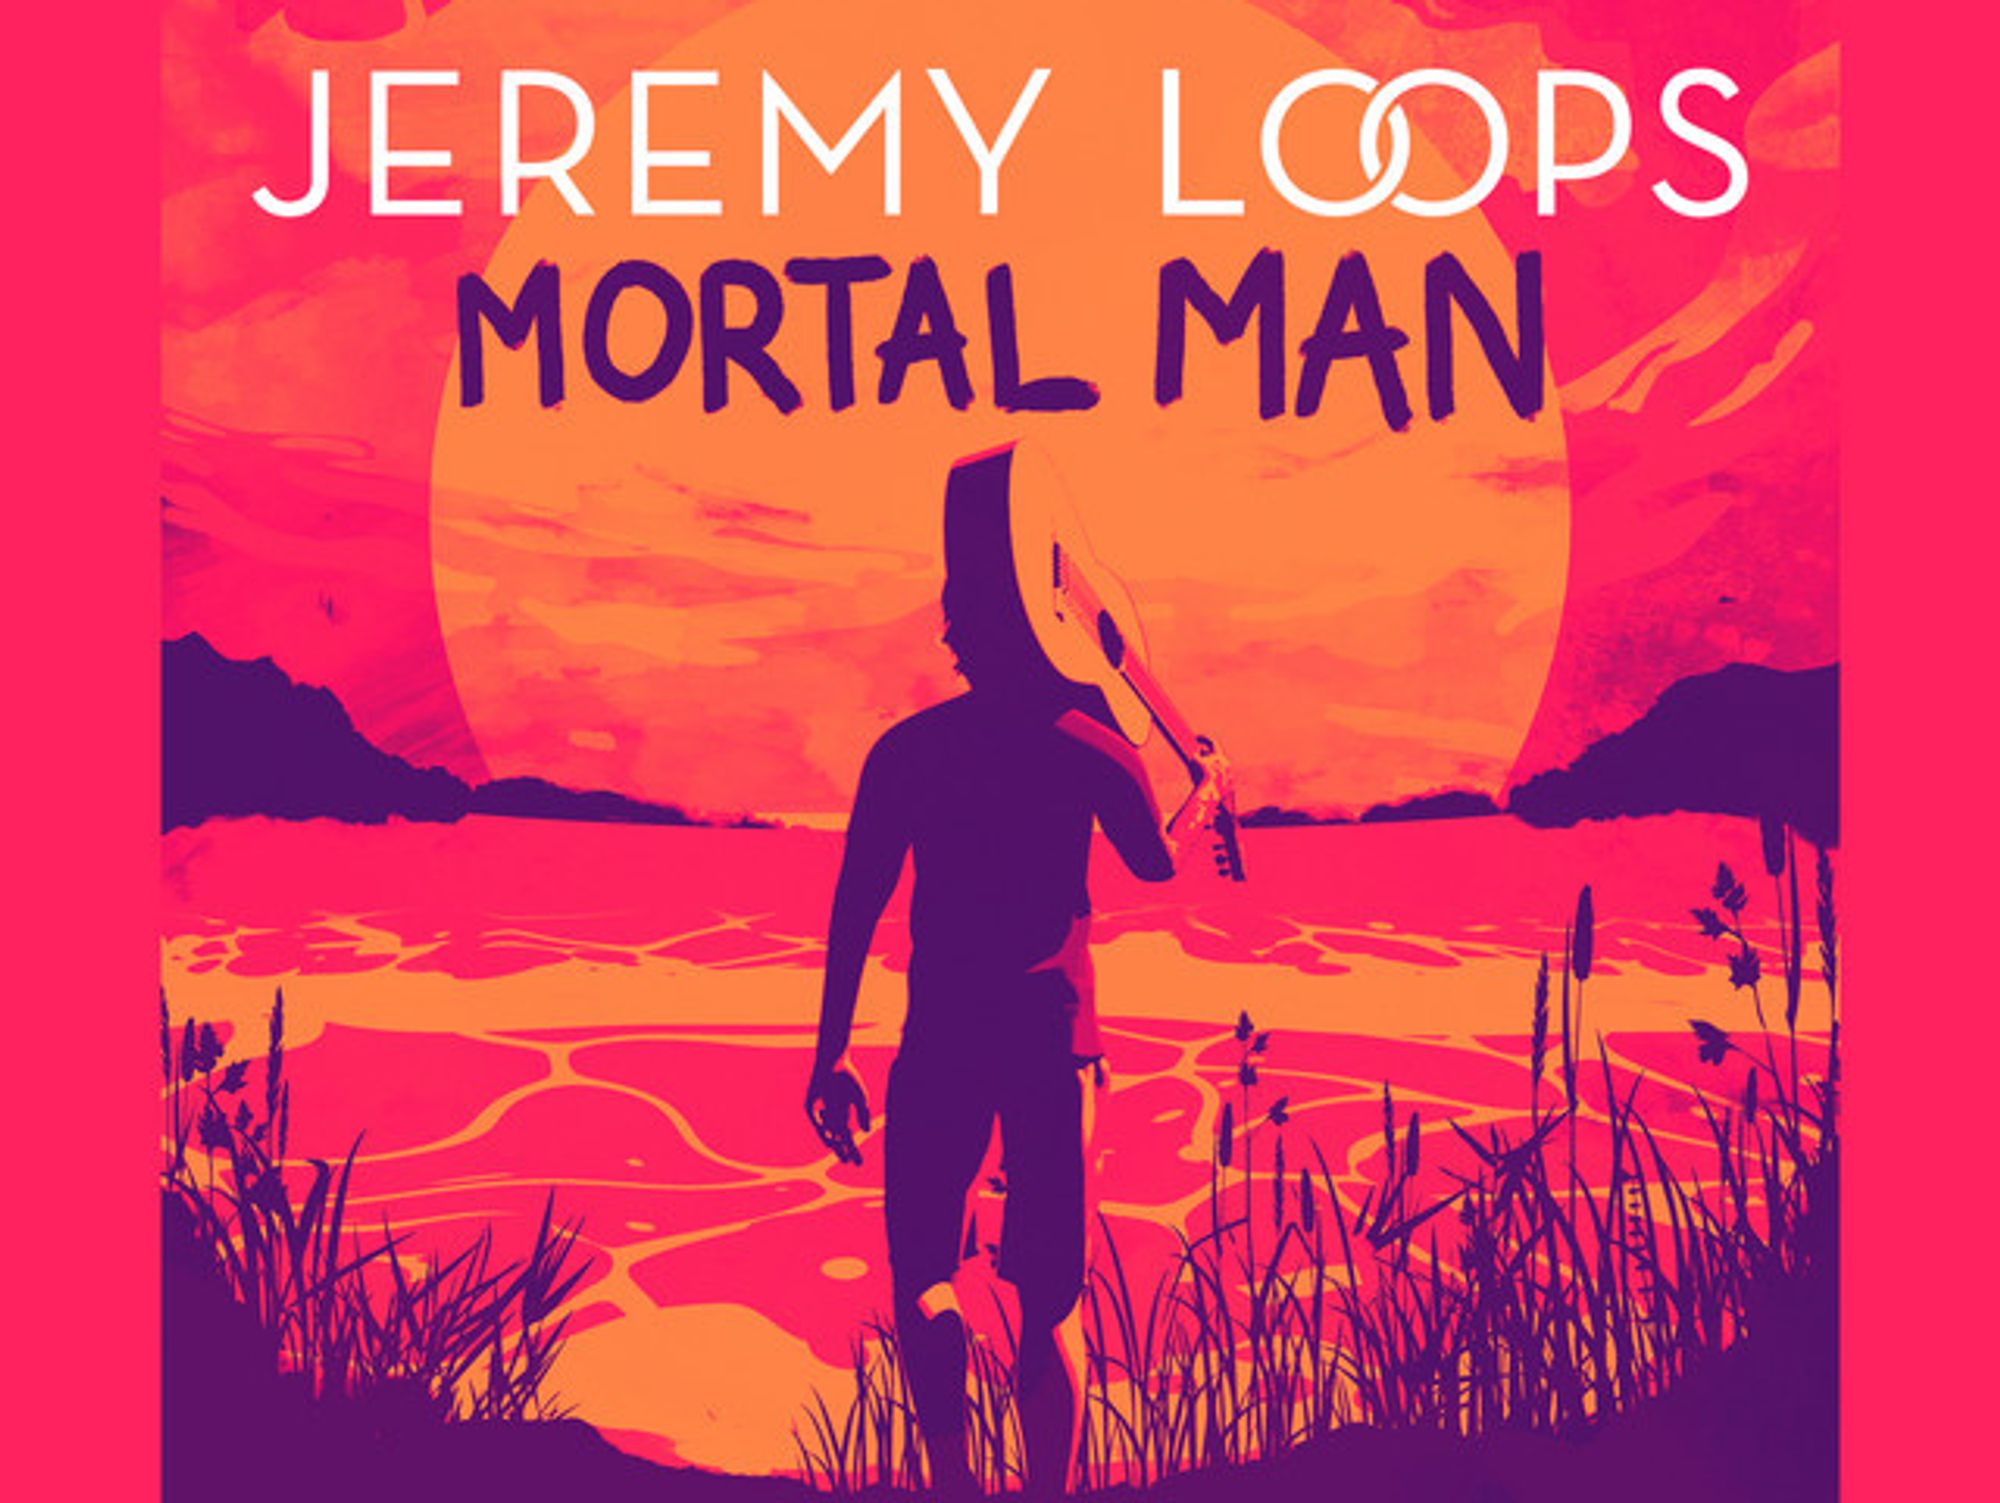 Listen to Alle Farben's House Remix of Jeremy Loops’ ‘Mortal Man’